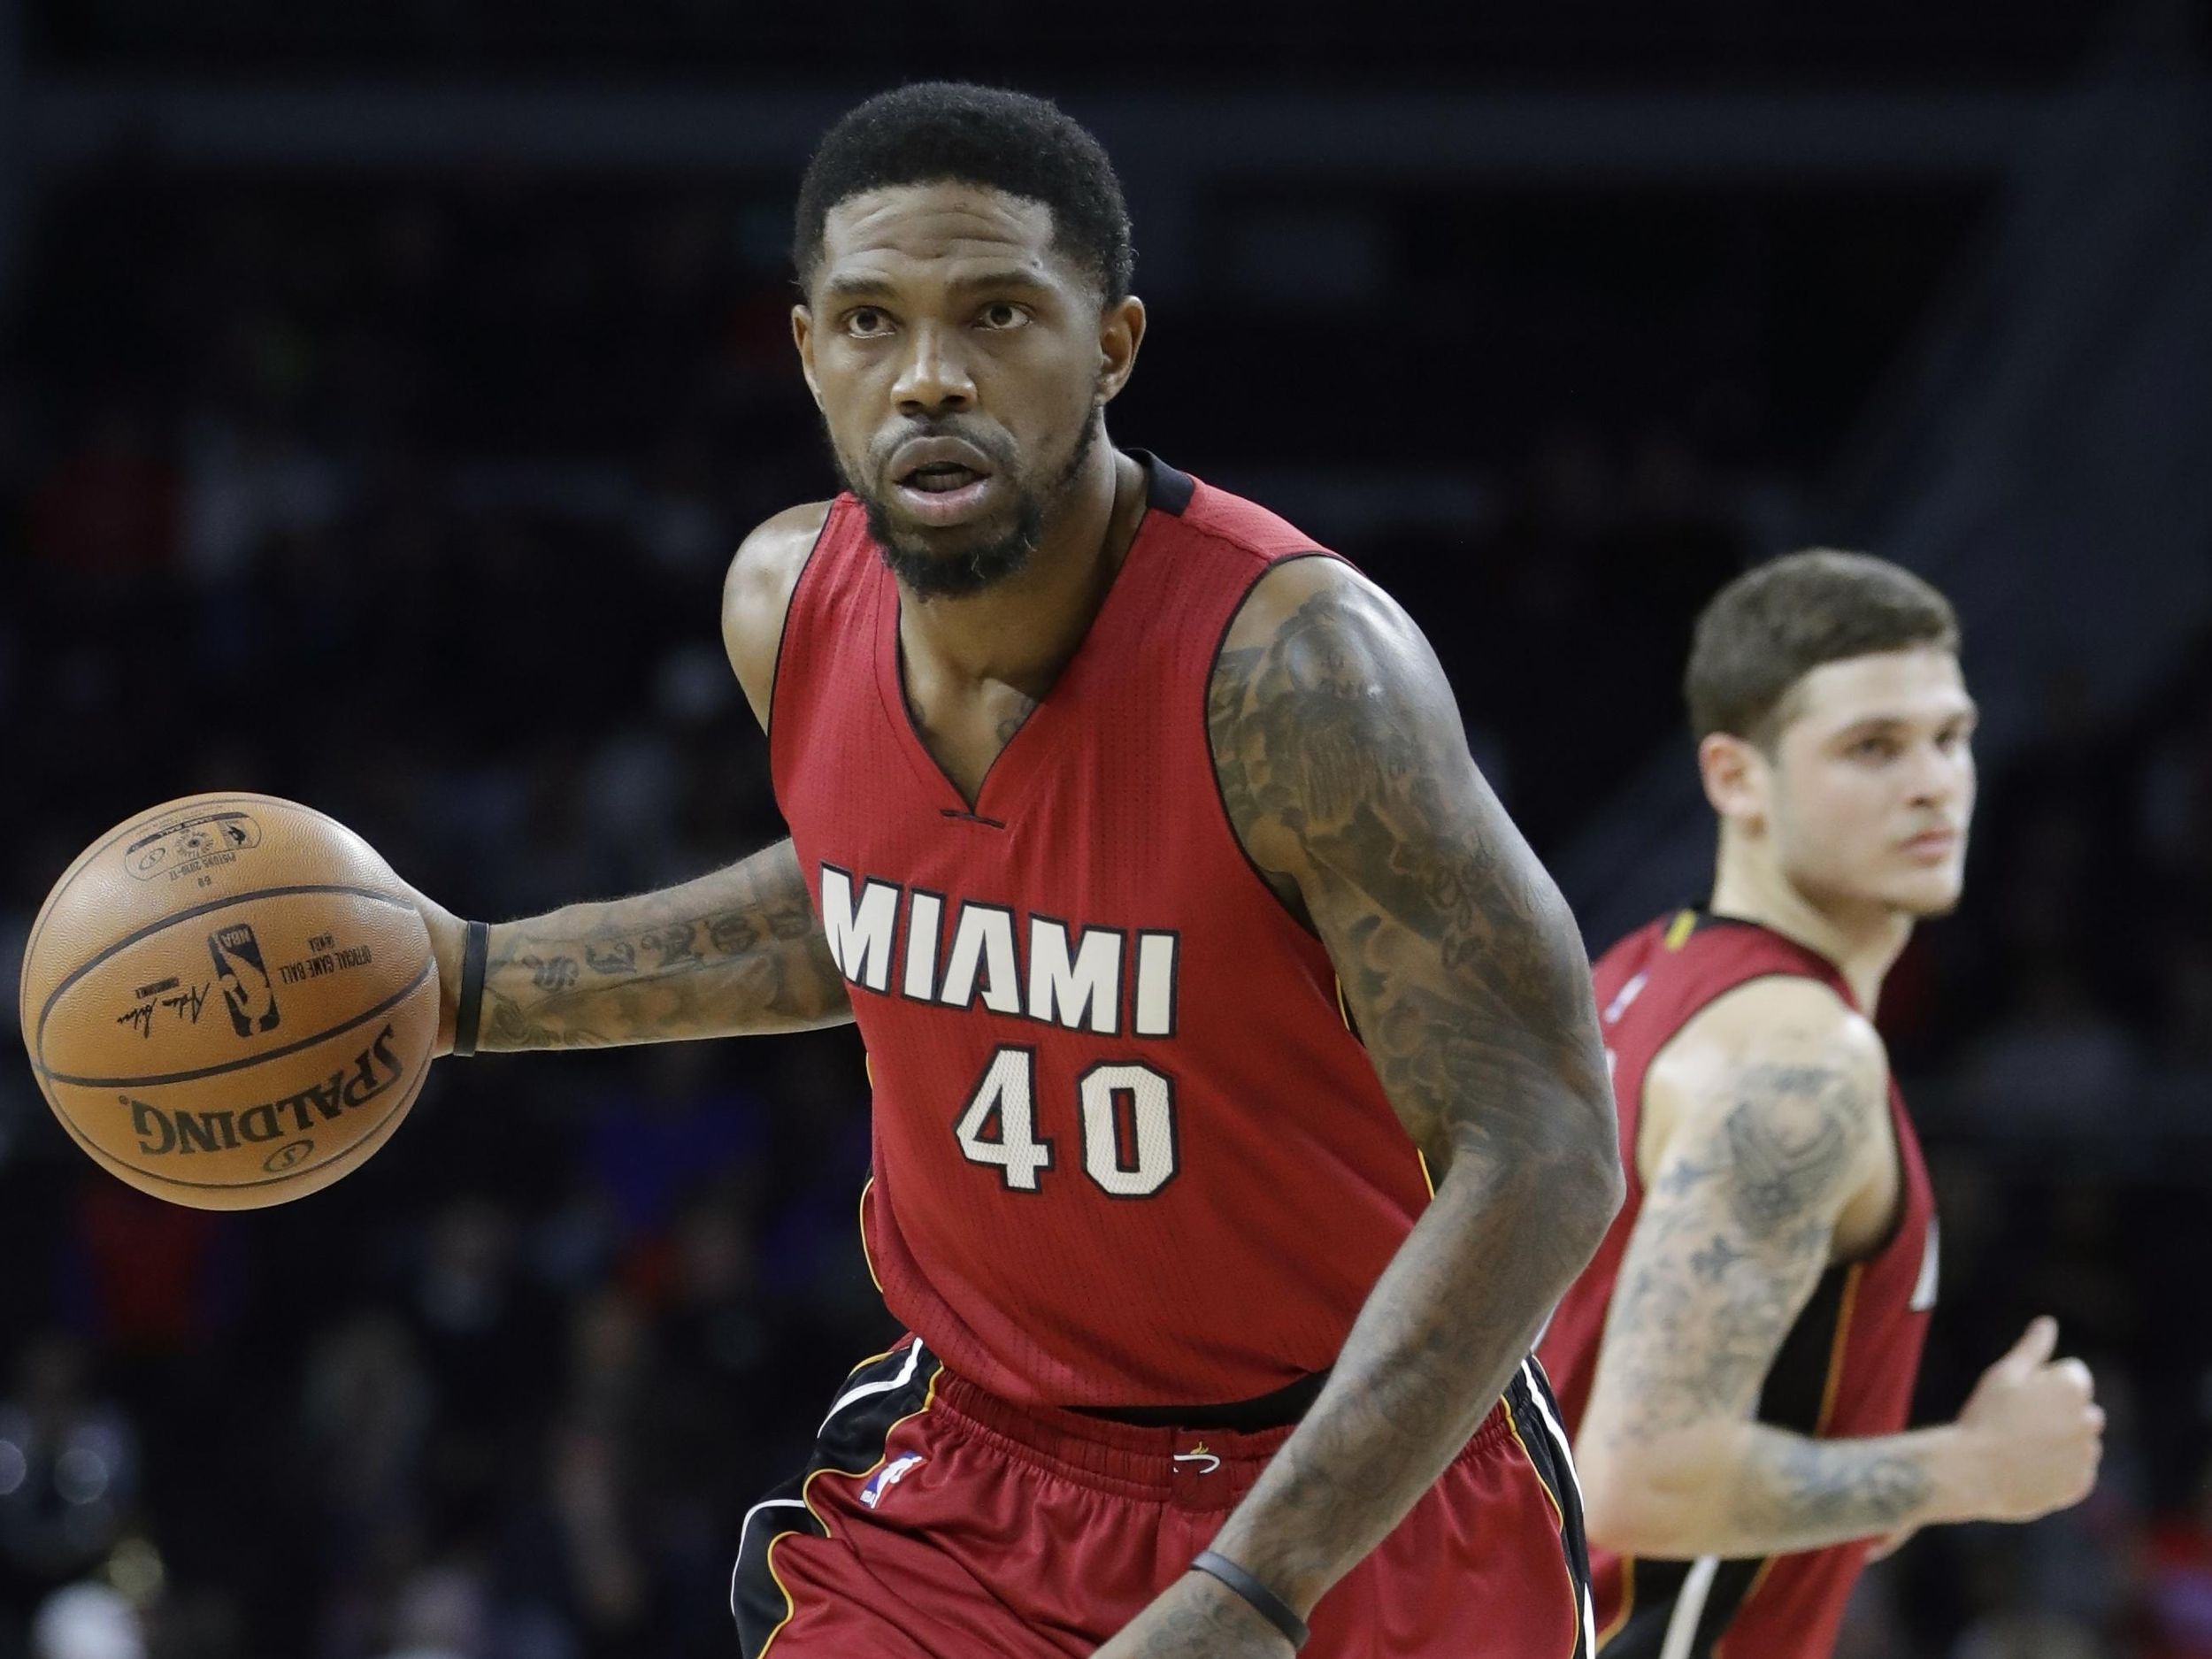 Udonis Haslem returning to Heat for 15th season